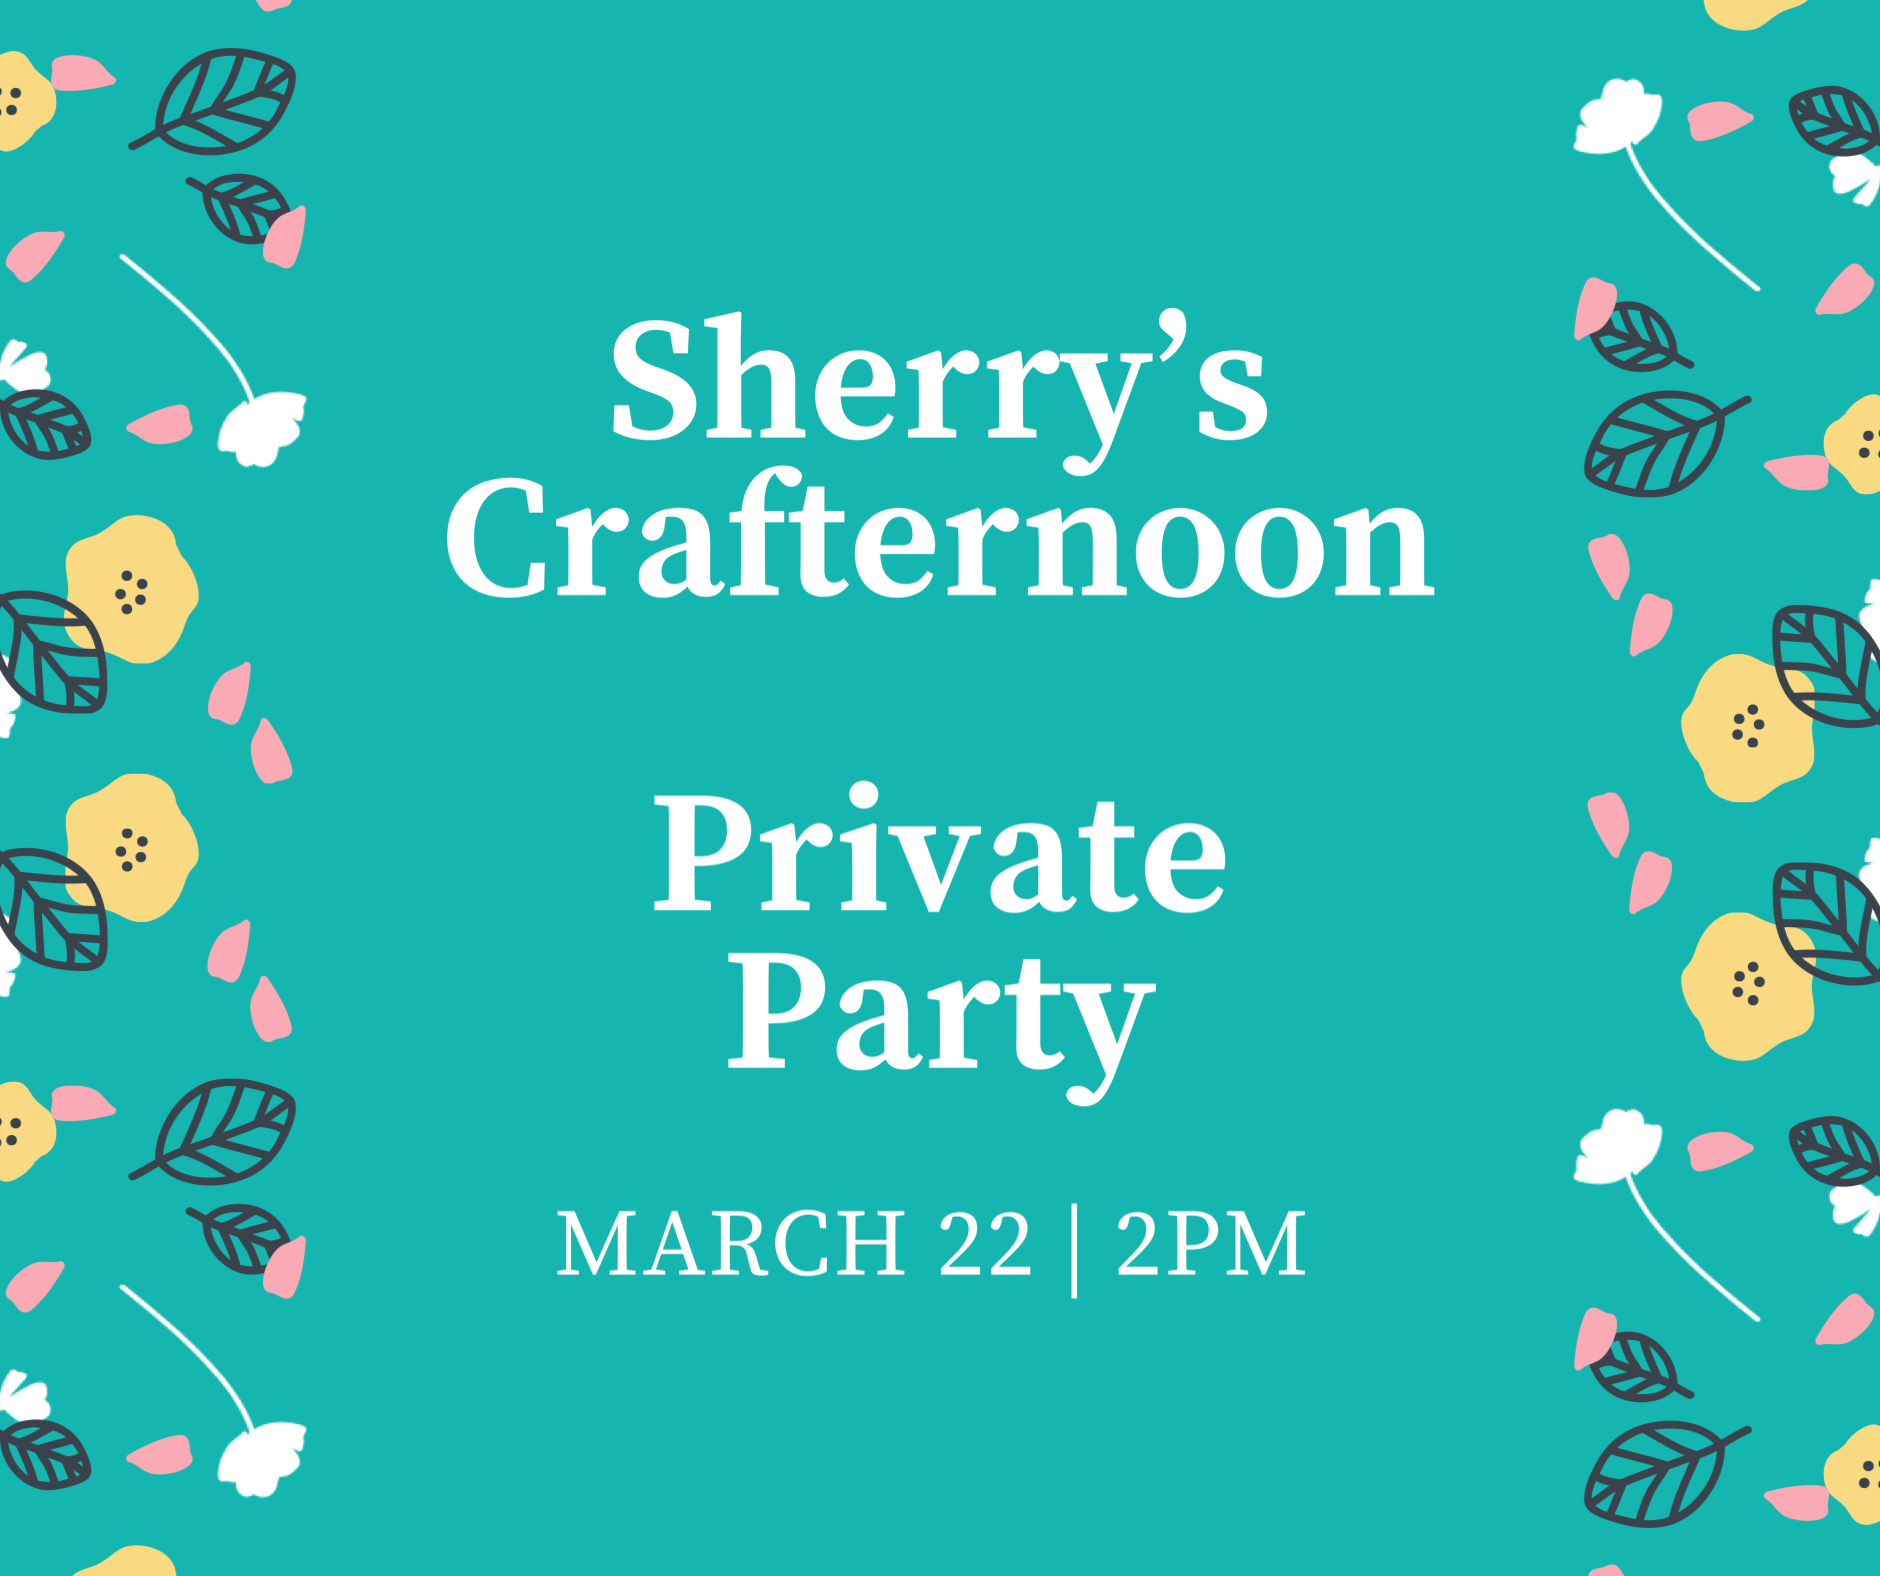 Sherry's Spring Crafternoon Private Party